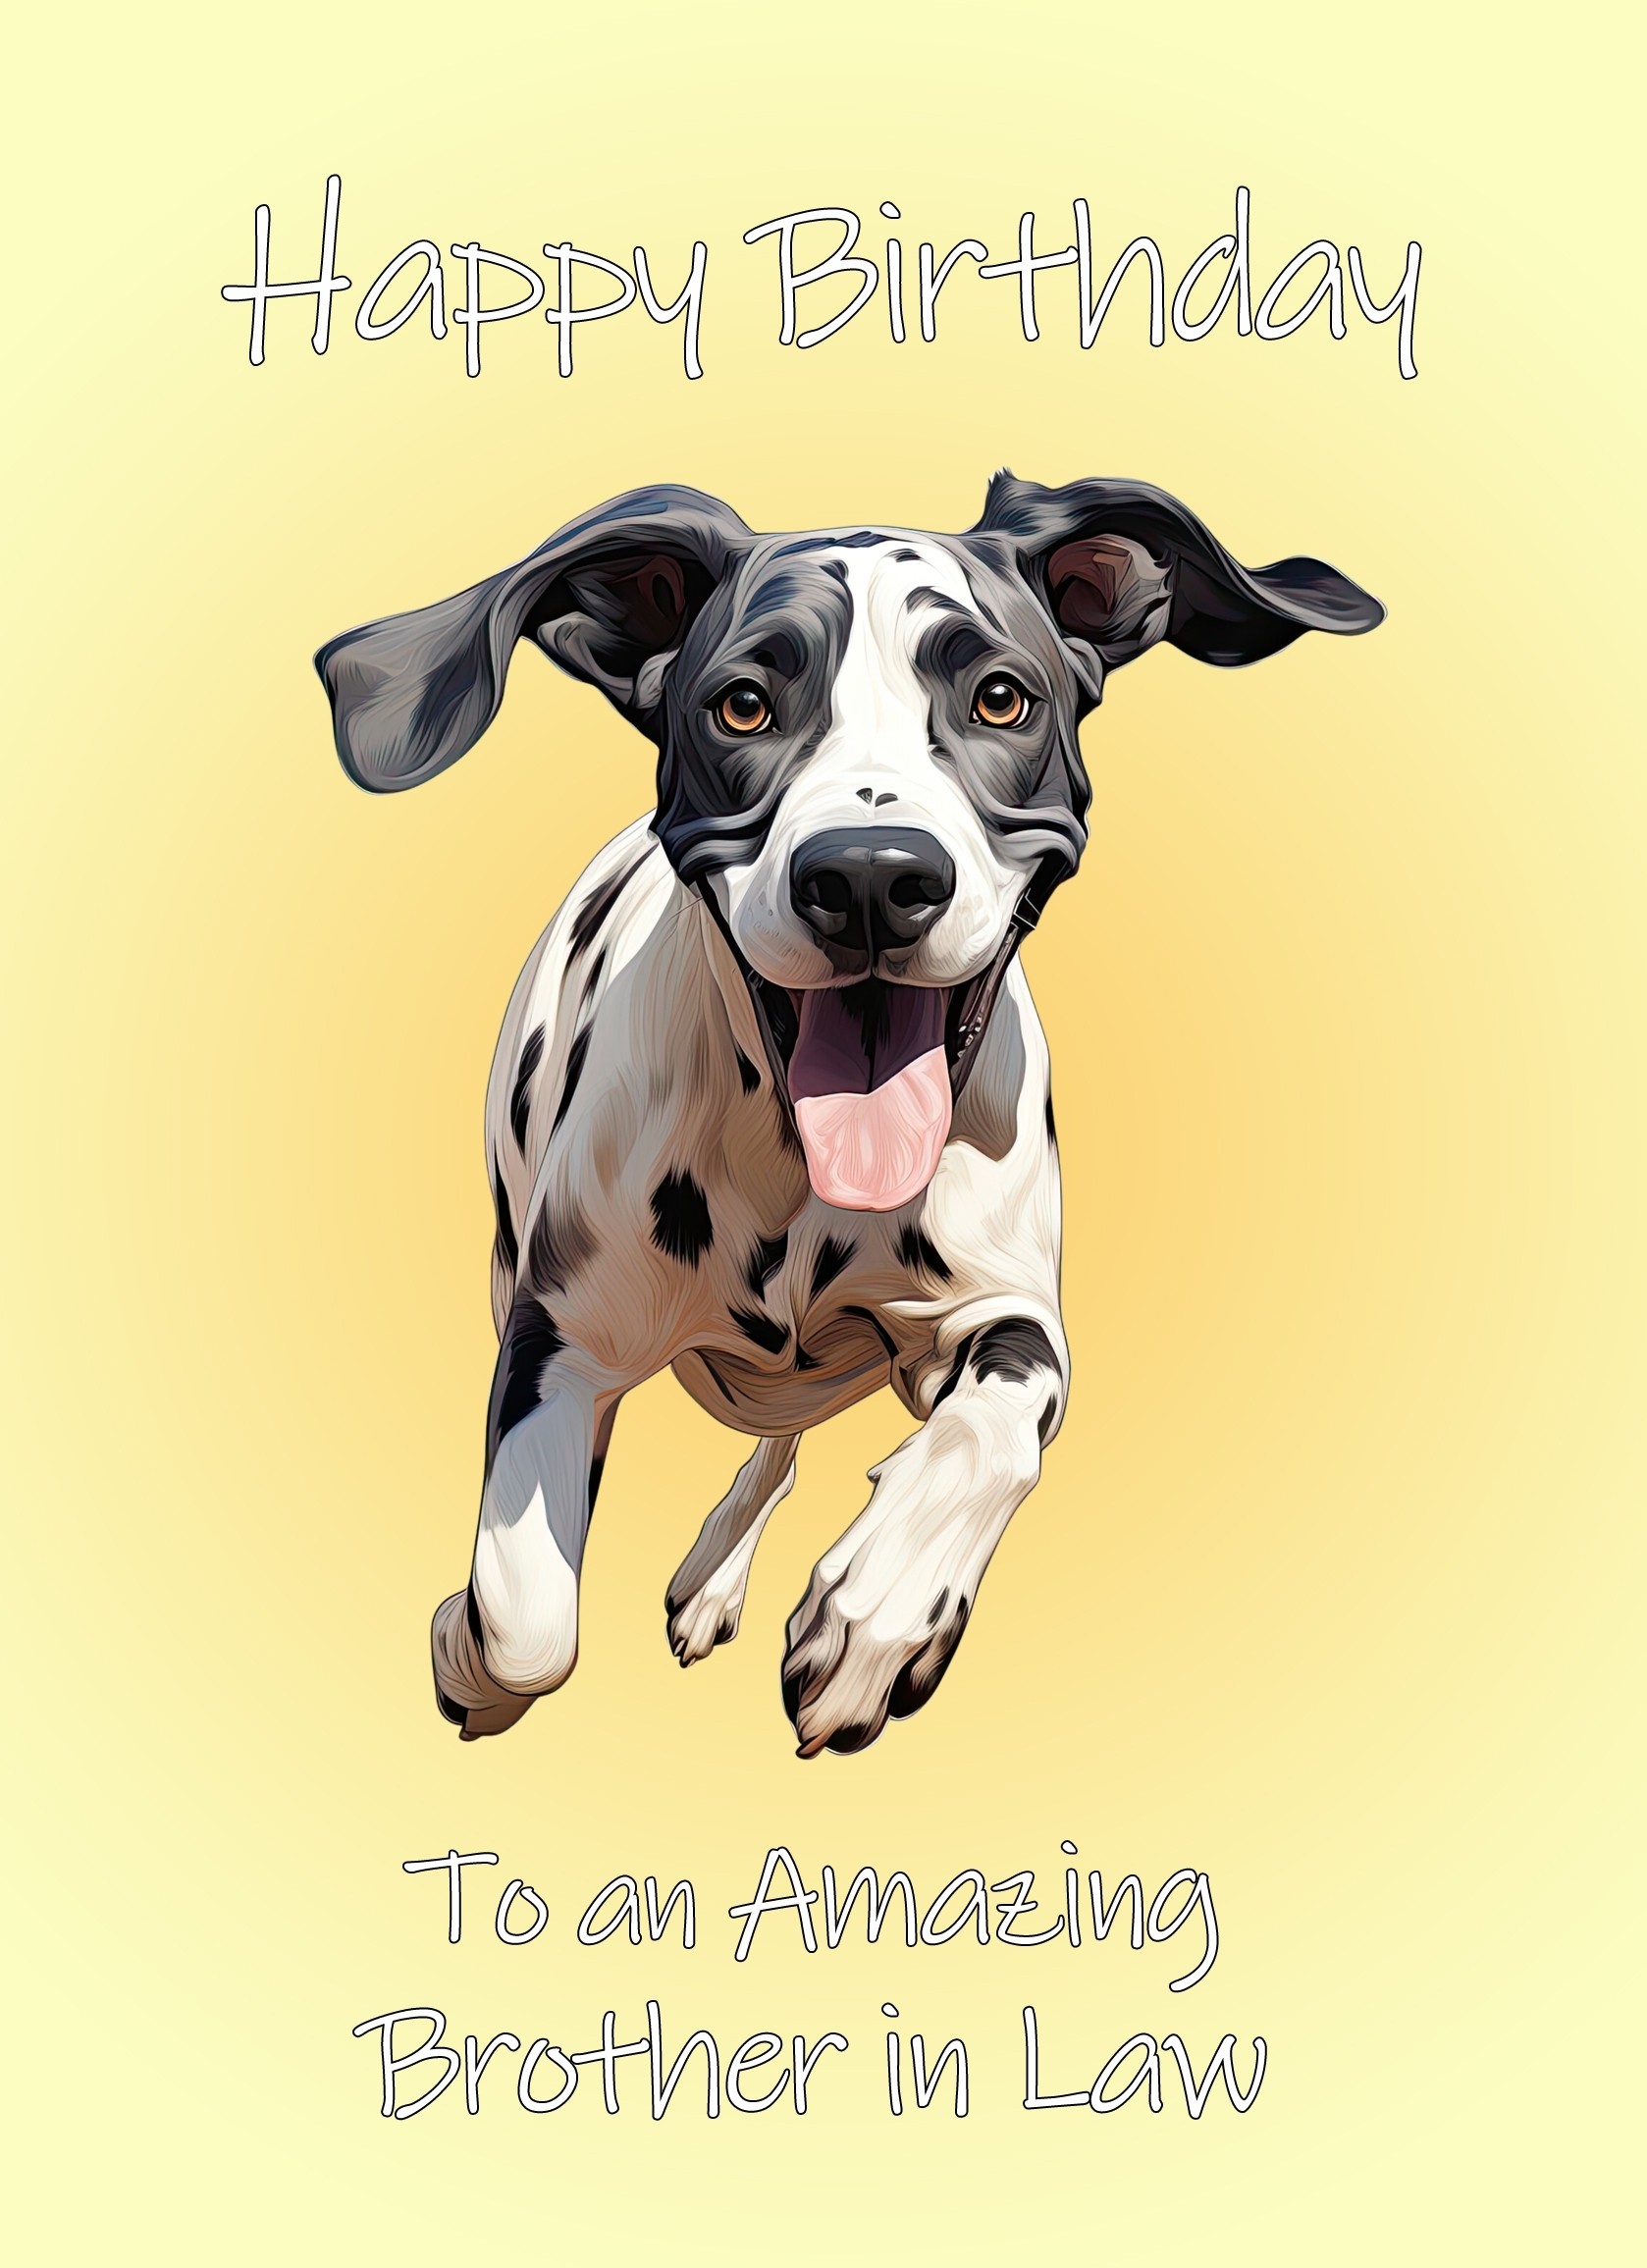 Great Dane Dog Birthday Card For Brother in Law